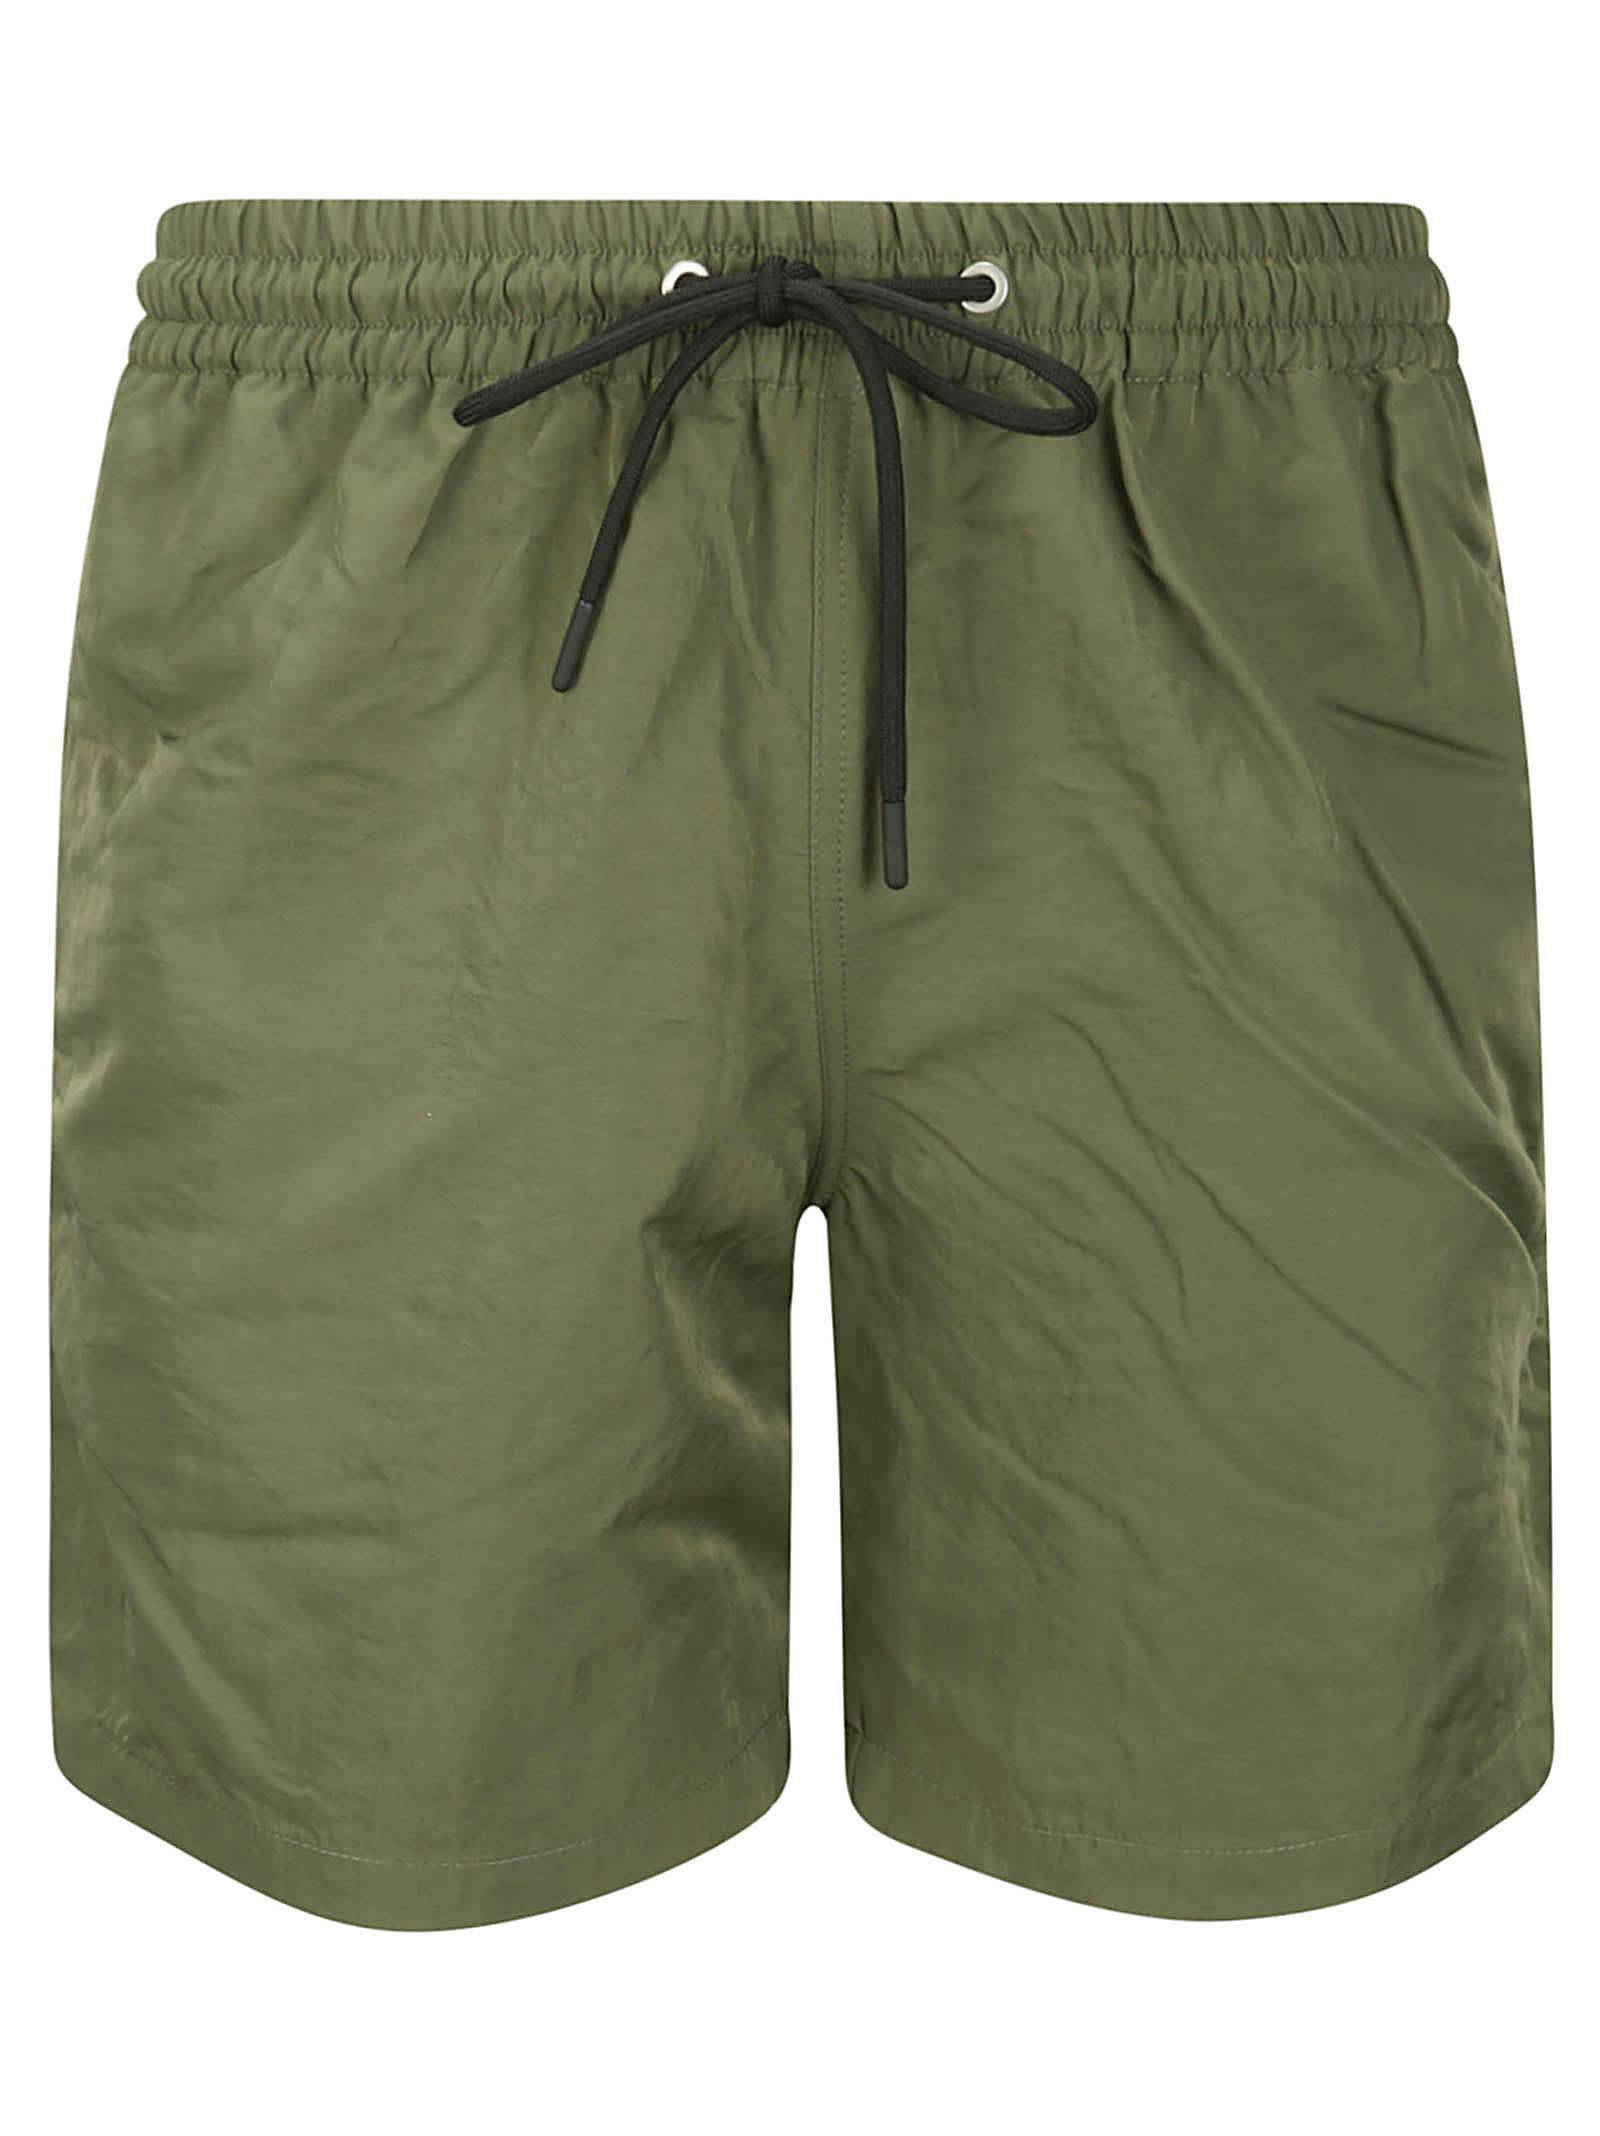 Sunflower Mike Shorts In Olive